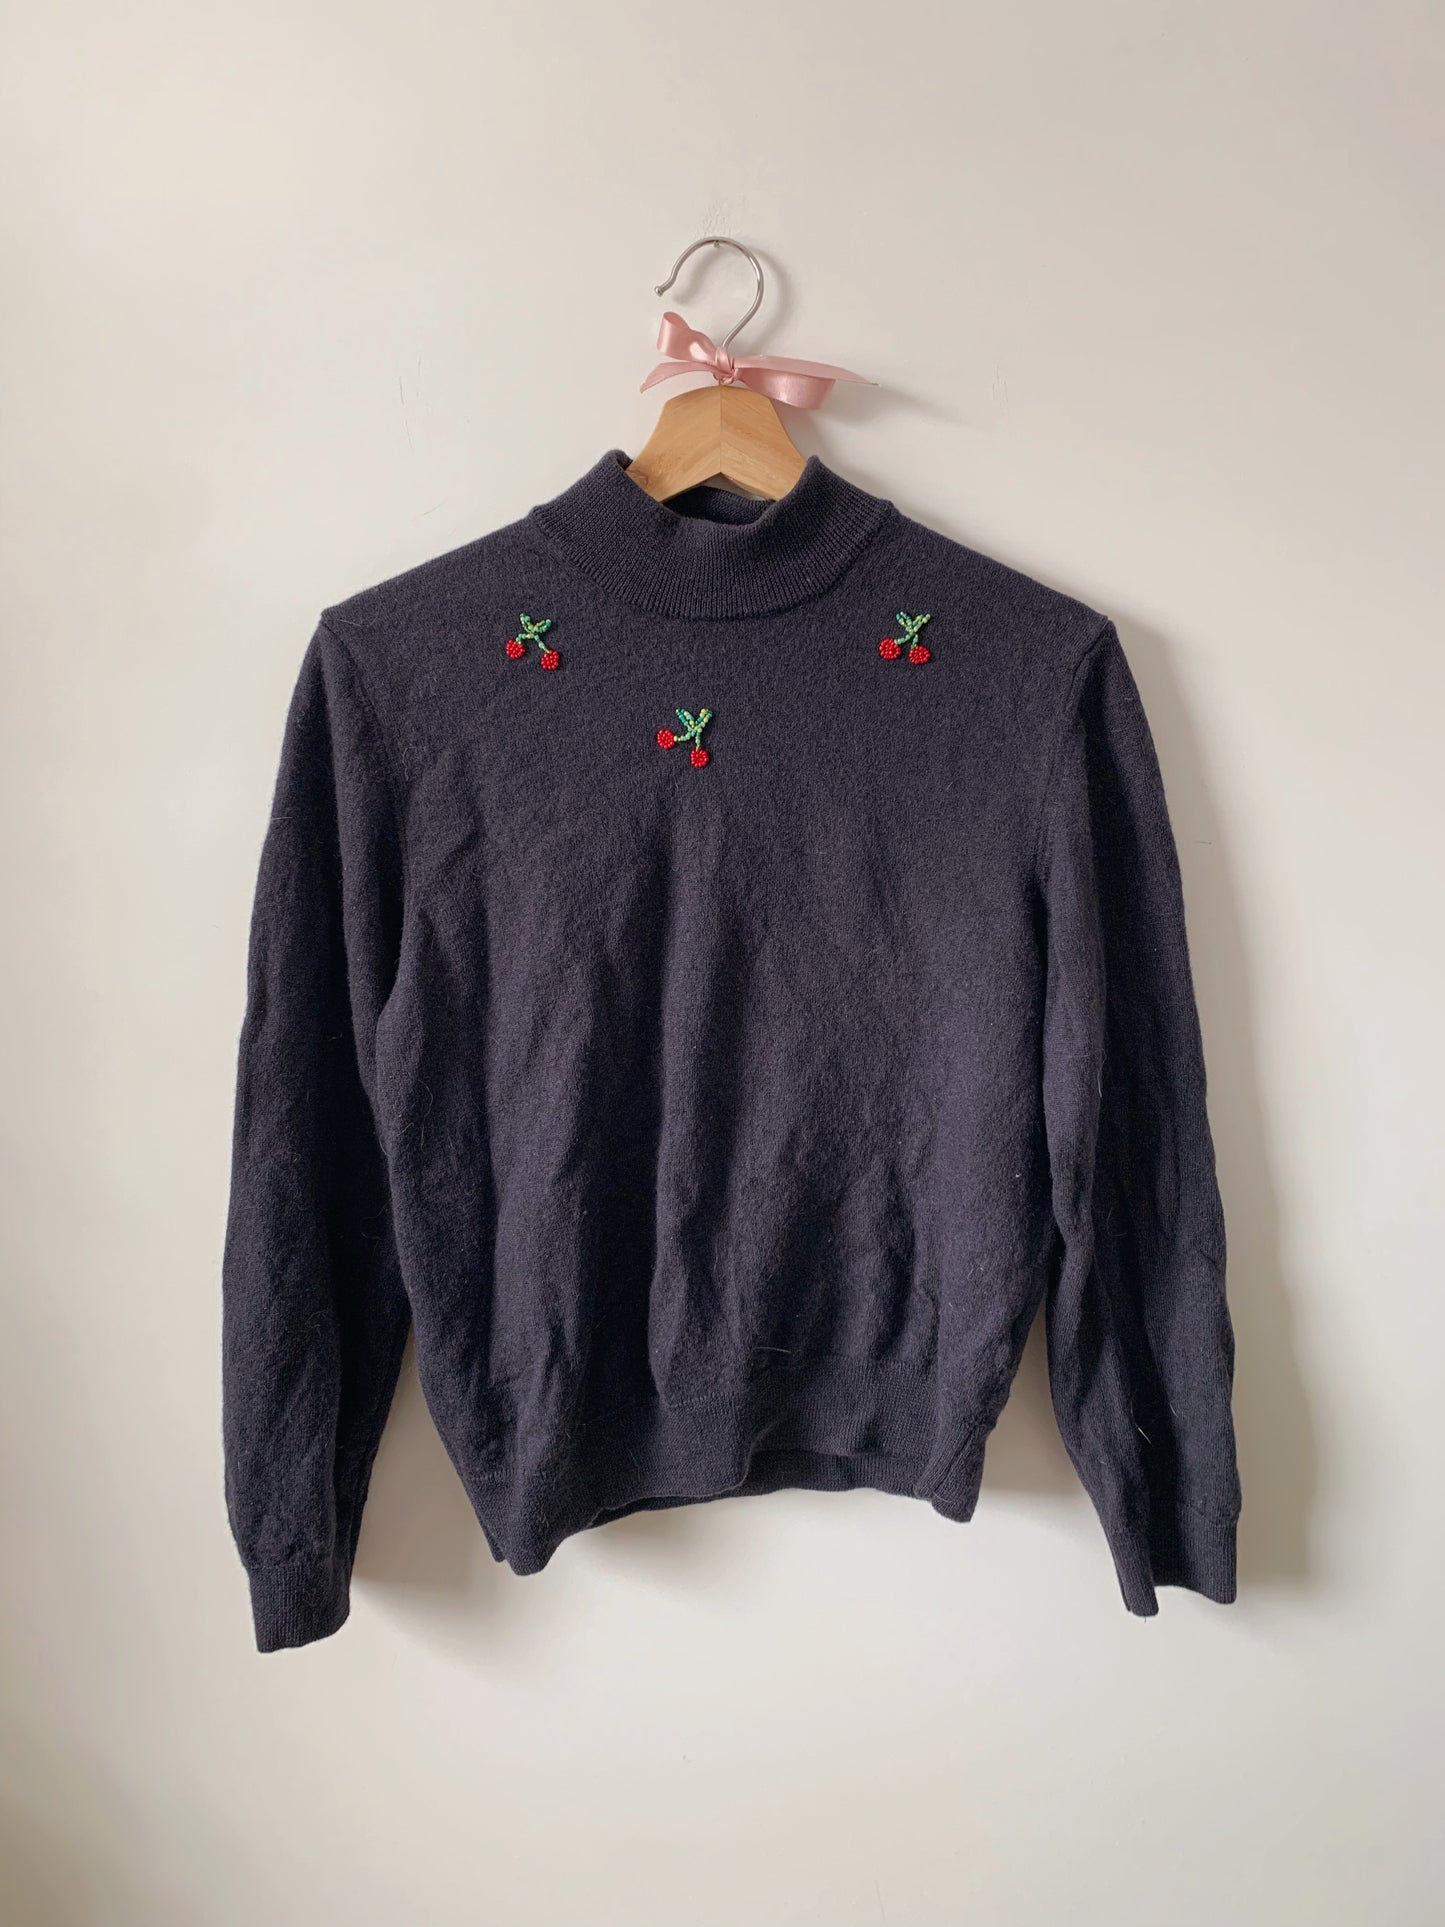 Beaded Cherry Upcycled Sweater